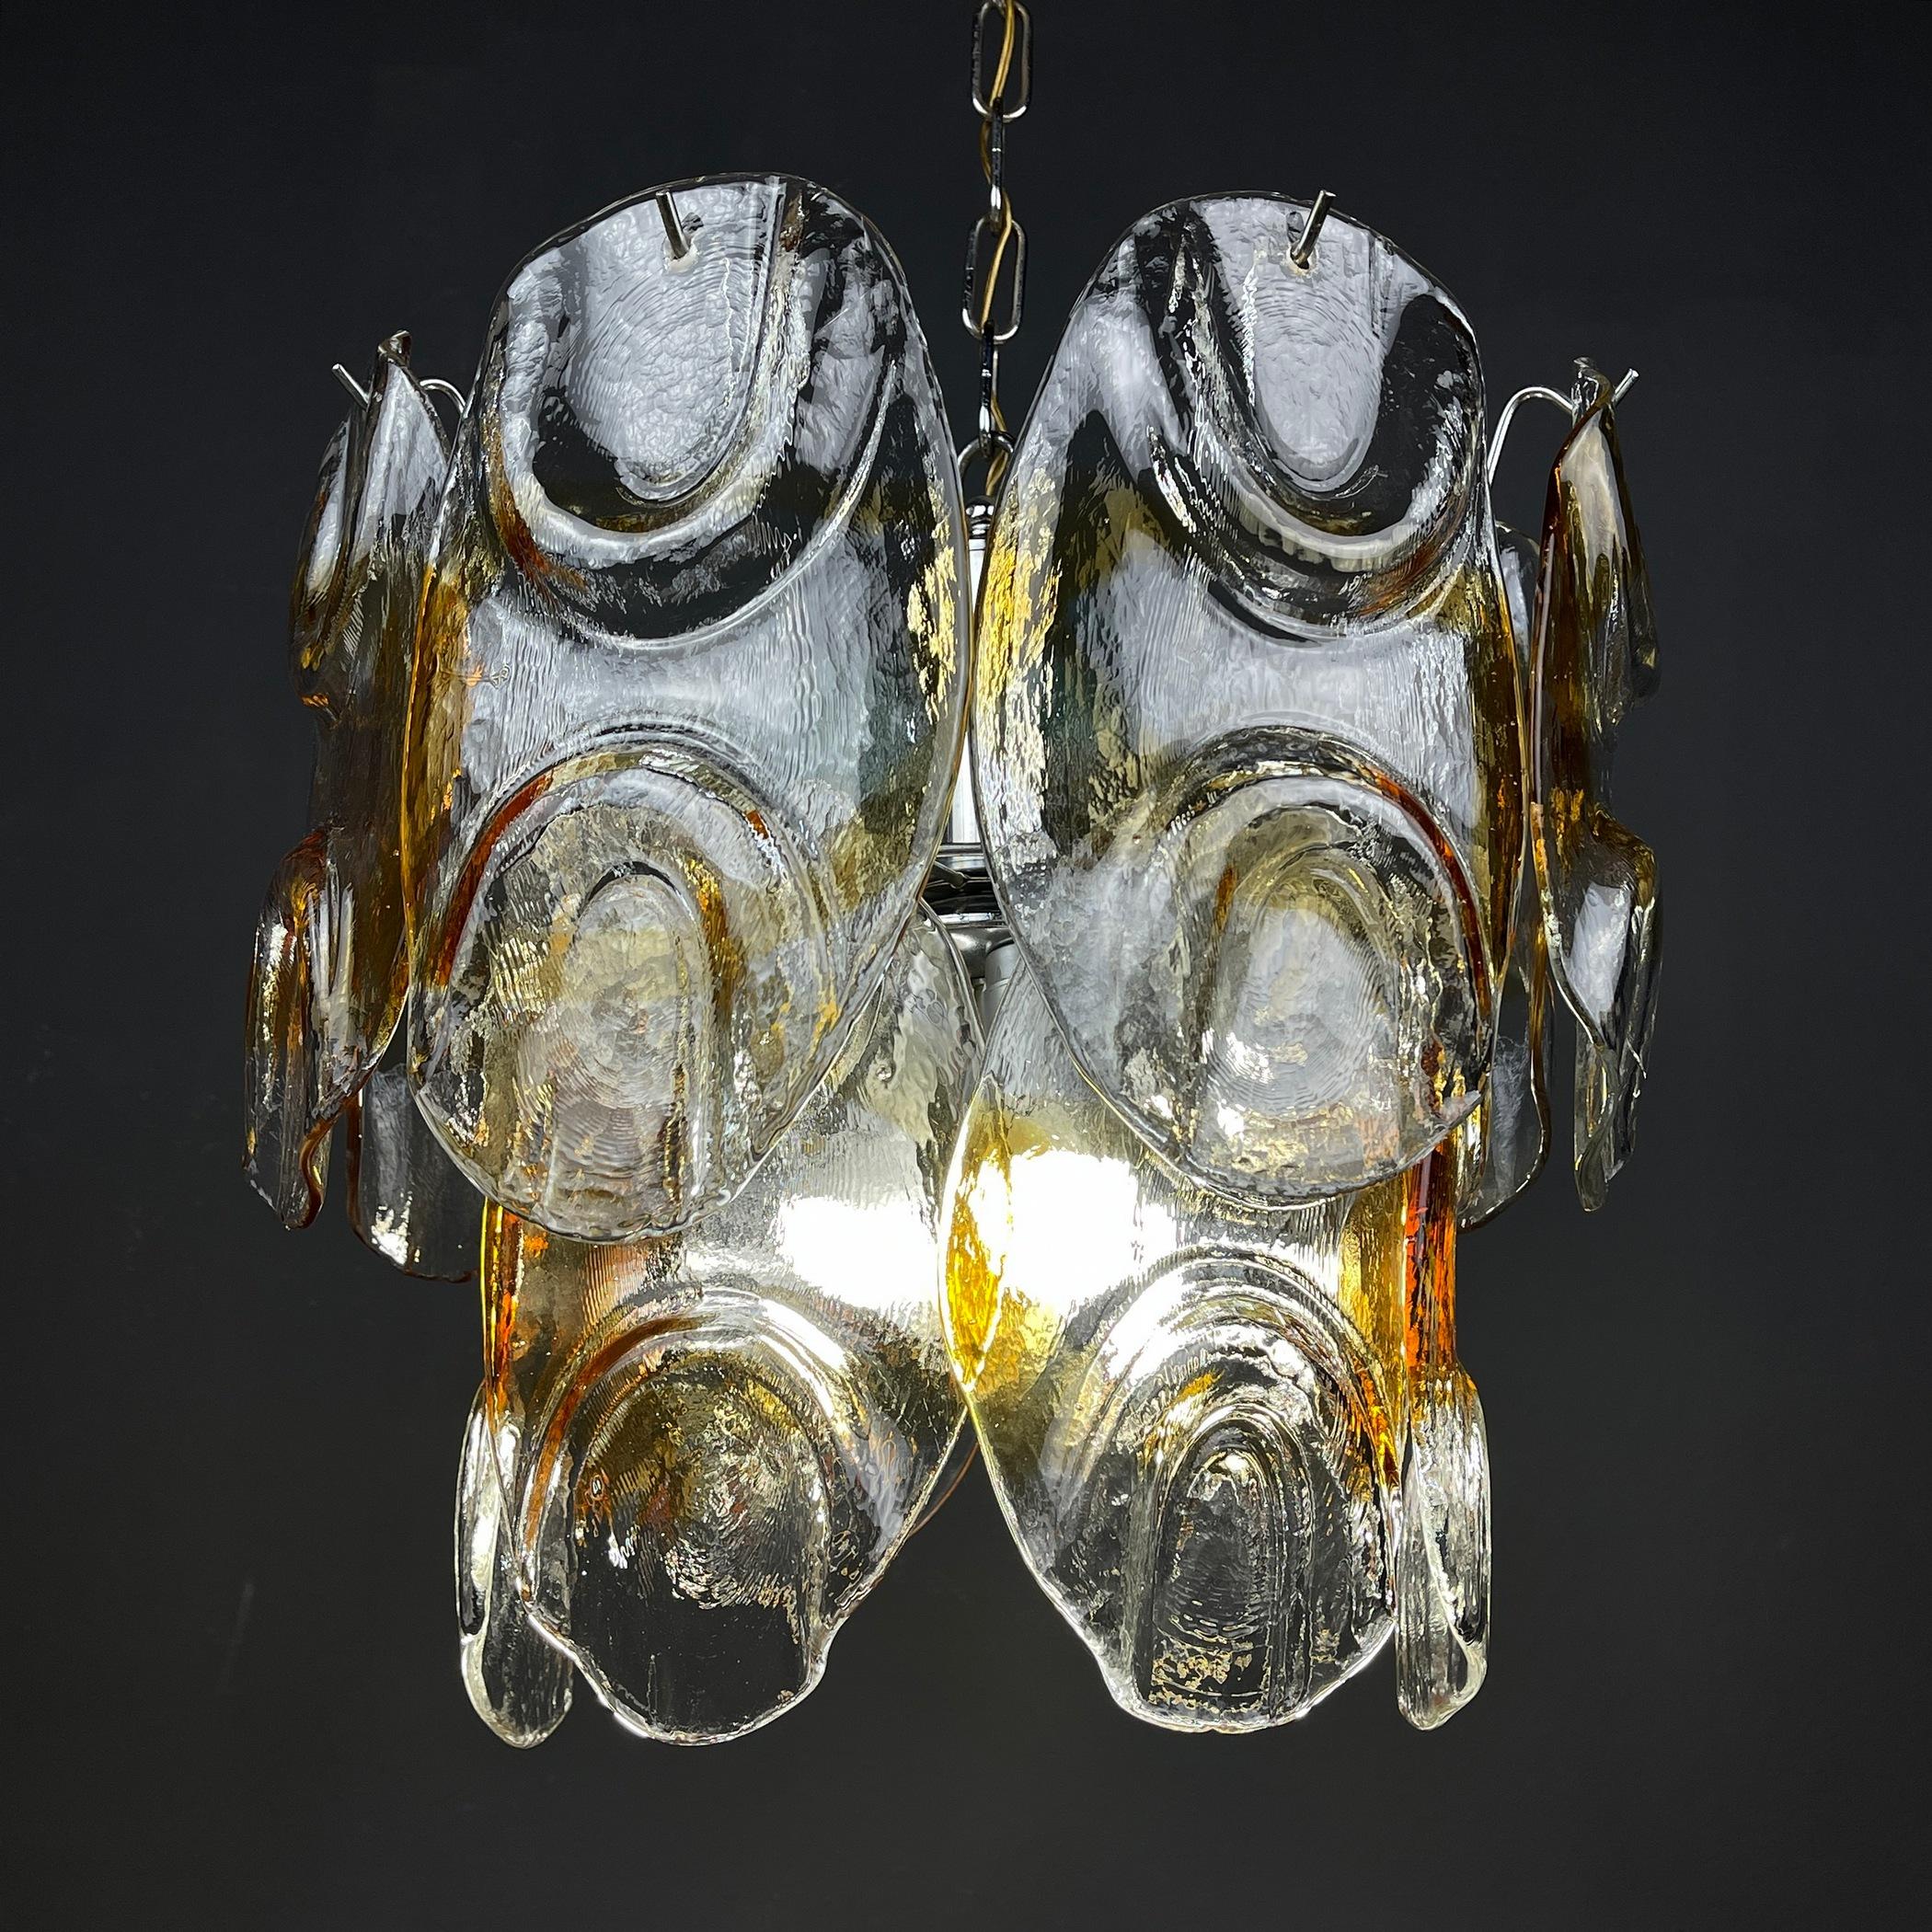 The absolutely fantastic vintage Murano glass chandelier by Mazzega made in Italy in the 1960s. Consists of 14 glass plates of Murano glass, made by Italian glassblowers. They follow the oldest Murano glassmaking technologies that were invented on